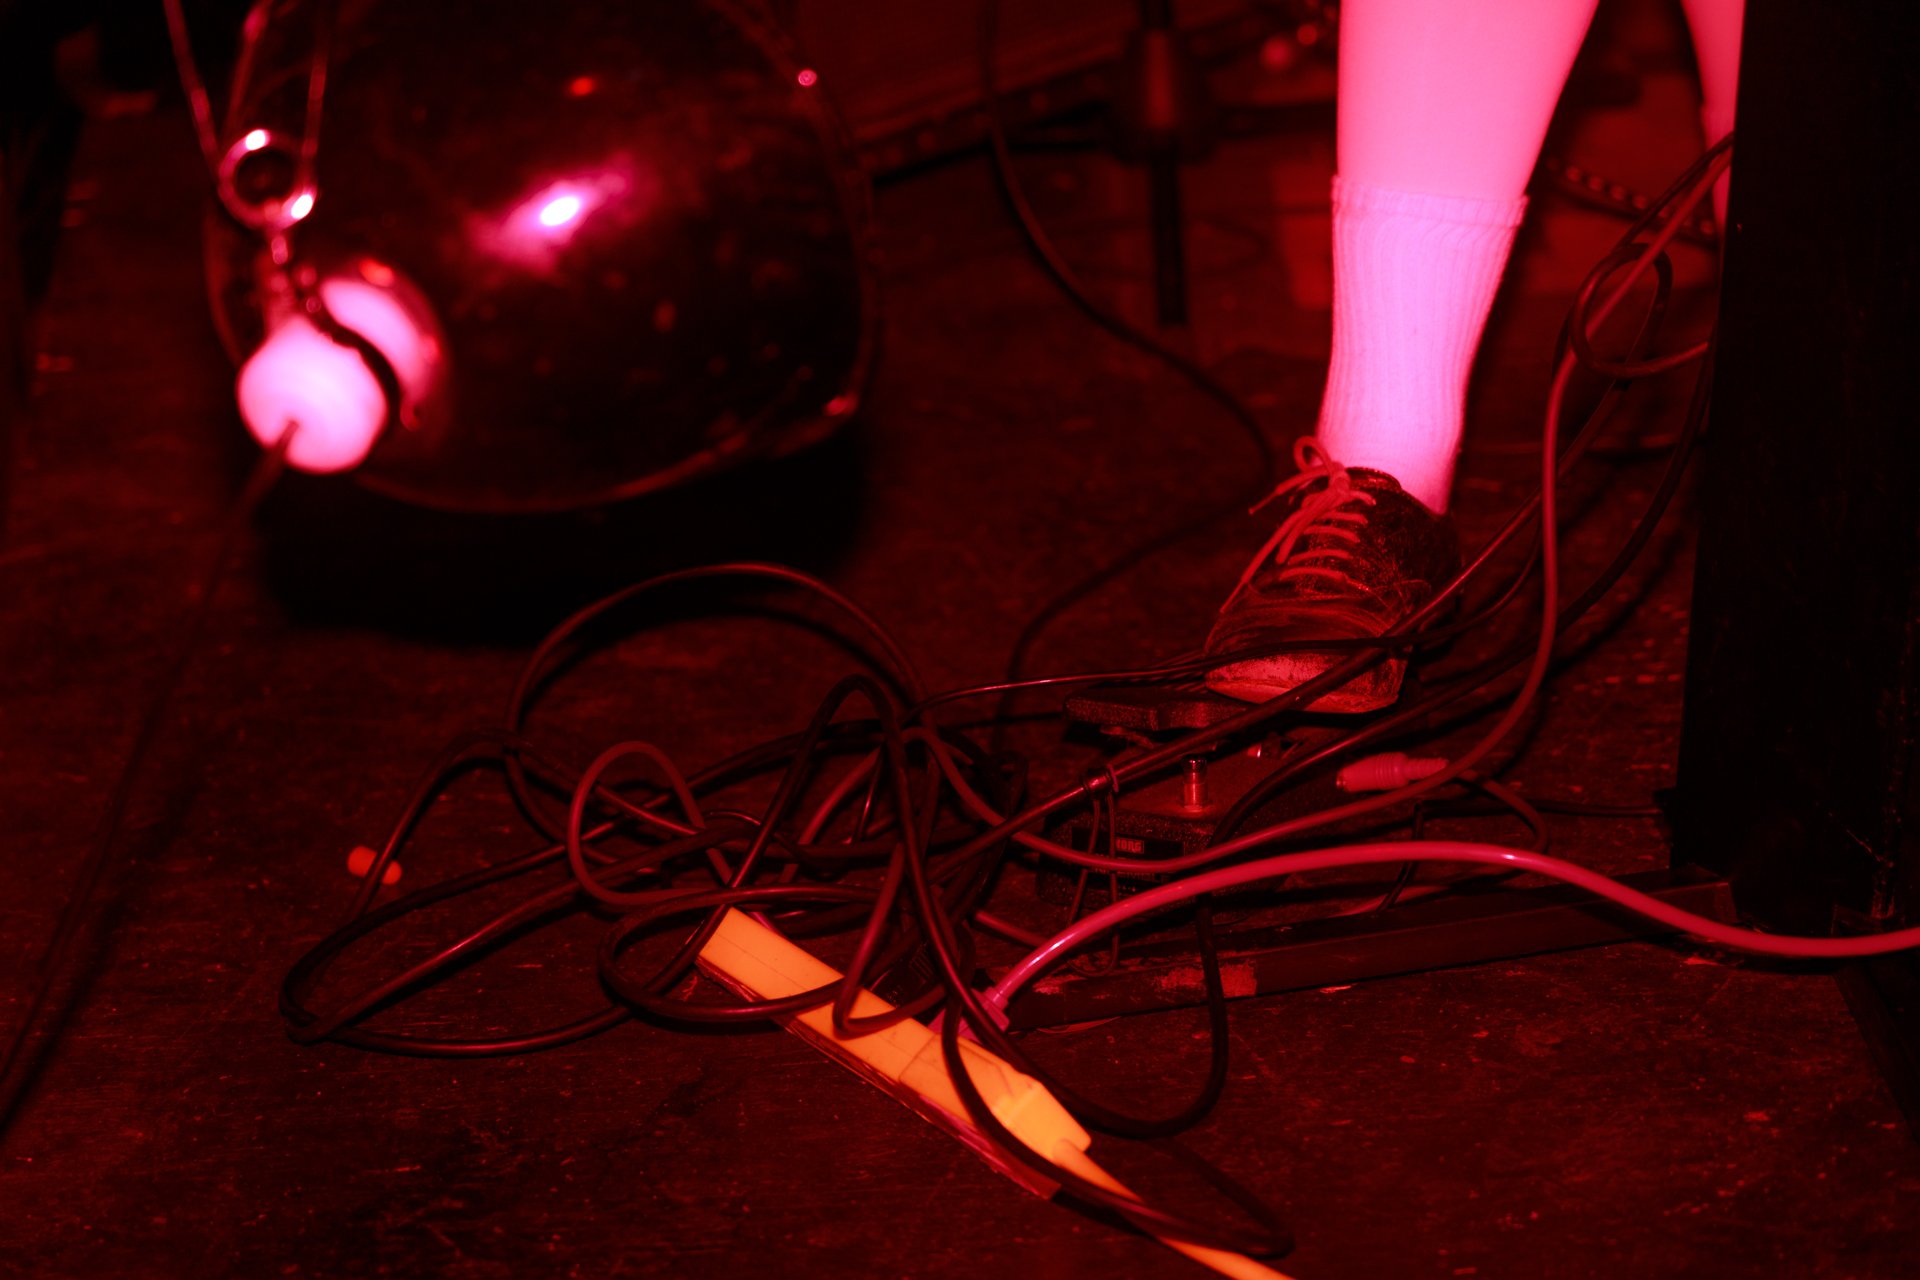 Yep-Marie Catafesta_Vancouver Live Photographer_ Music show photography_Vancouver_Indie Band_Prog_Shoes_Feet2.jpg